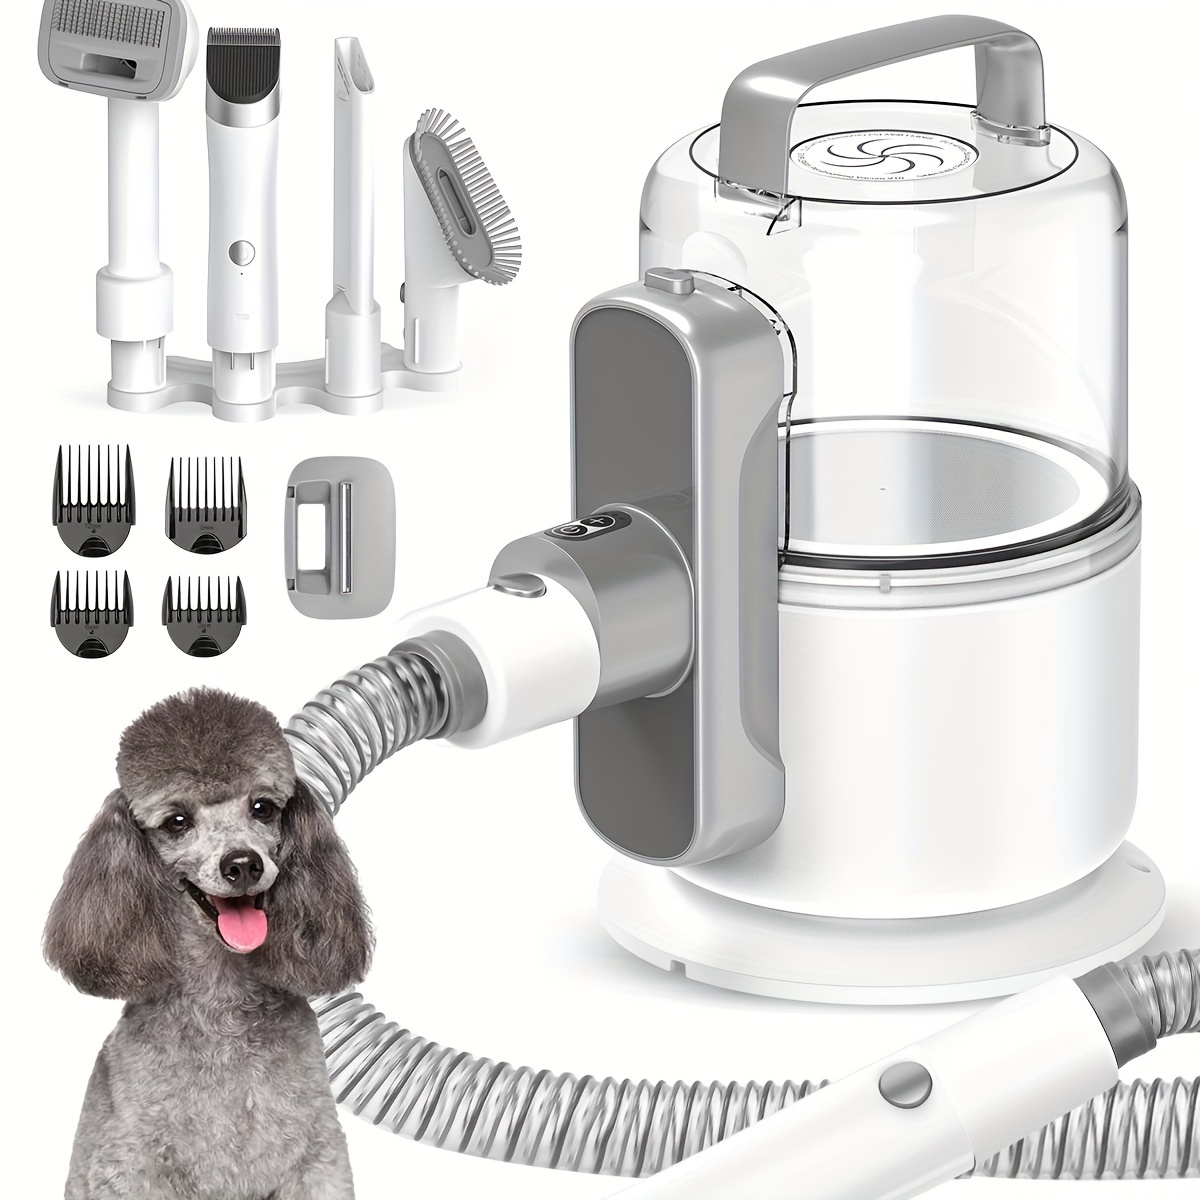 

Dog Grooming Vacuum, 6 In 1 Pet Grooming Kit For Shedding With 2.1 L Large Dust Cup, Grooming Vacuum For Dogs & Cats At Home Quiet, 3 Modes Of Vacuum Suction